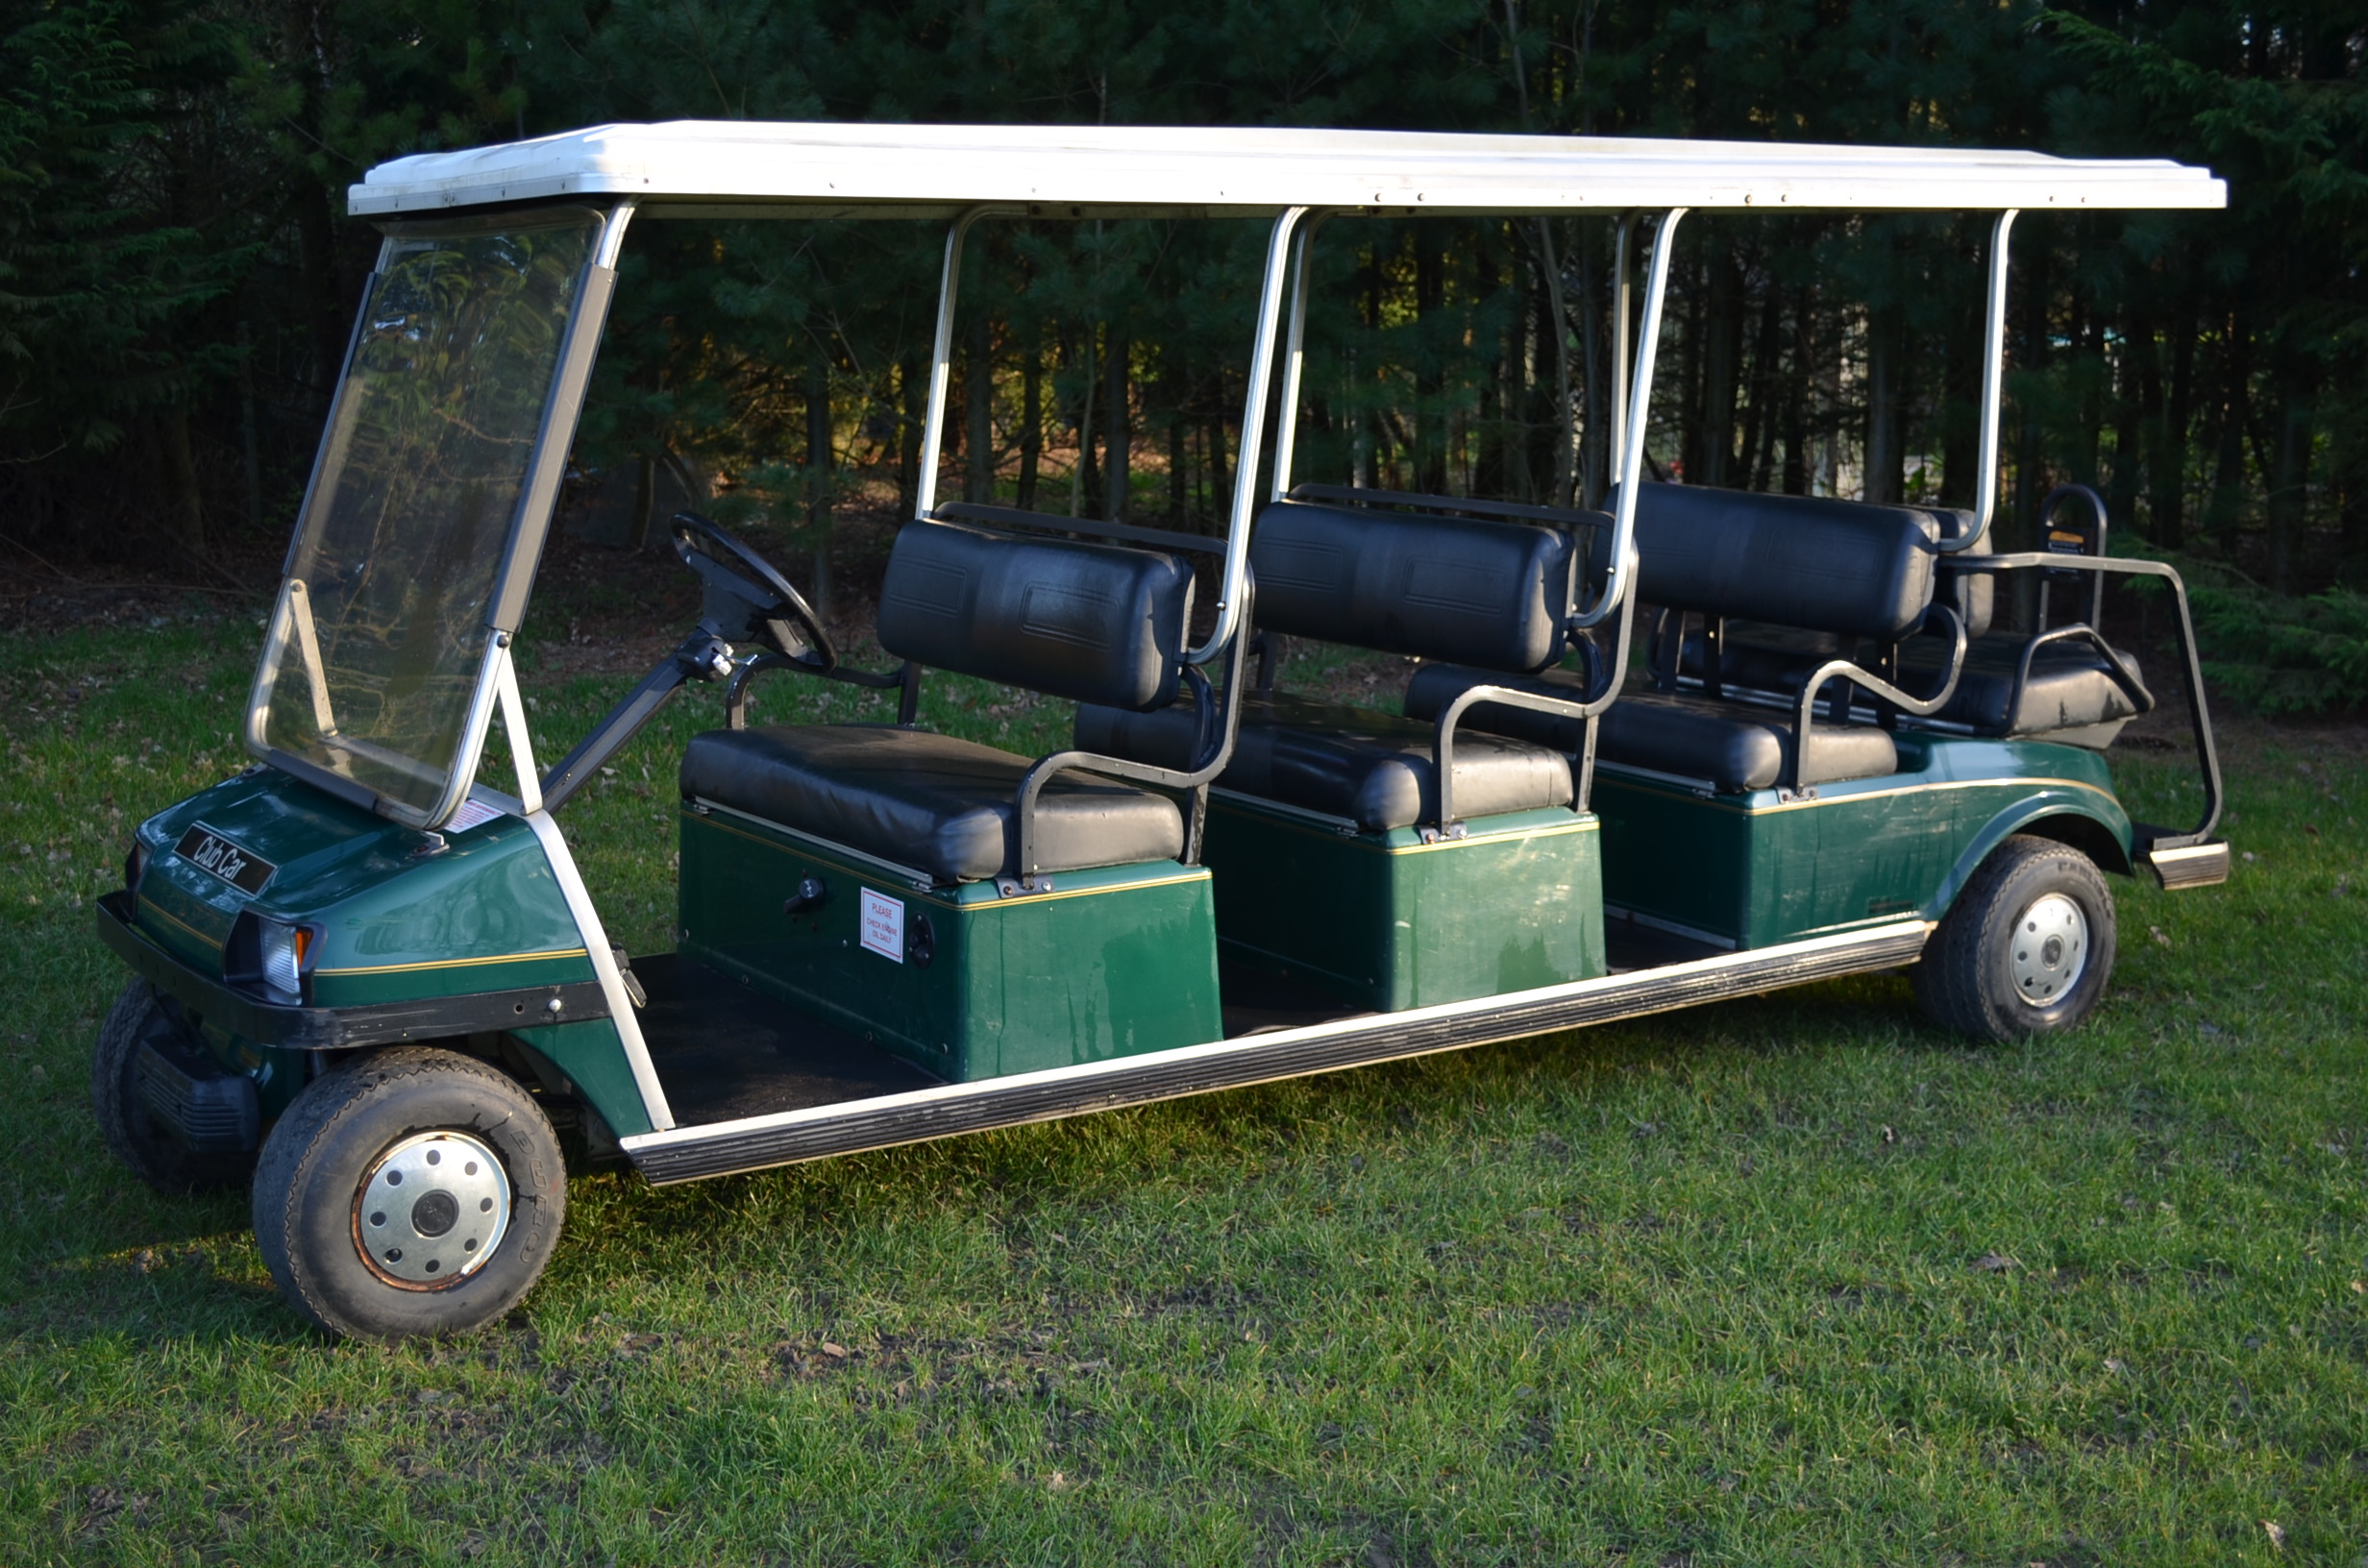 pro_turf_hire_8_Seater_Golf_Buggy.jpg